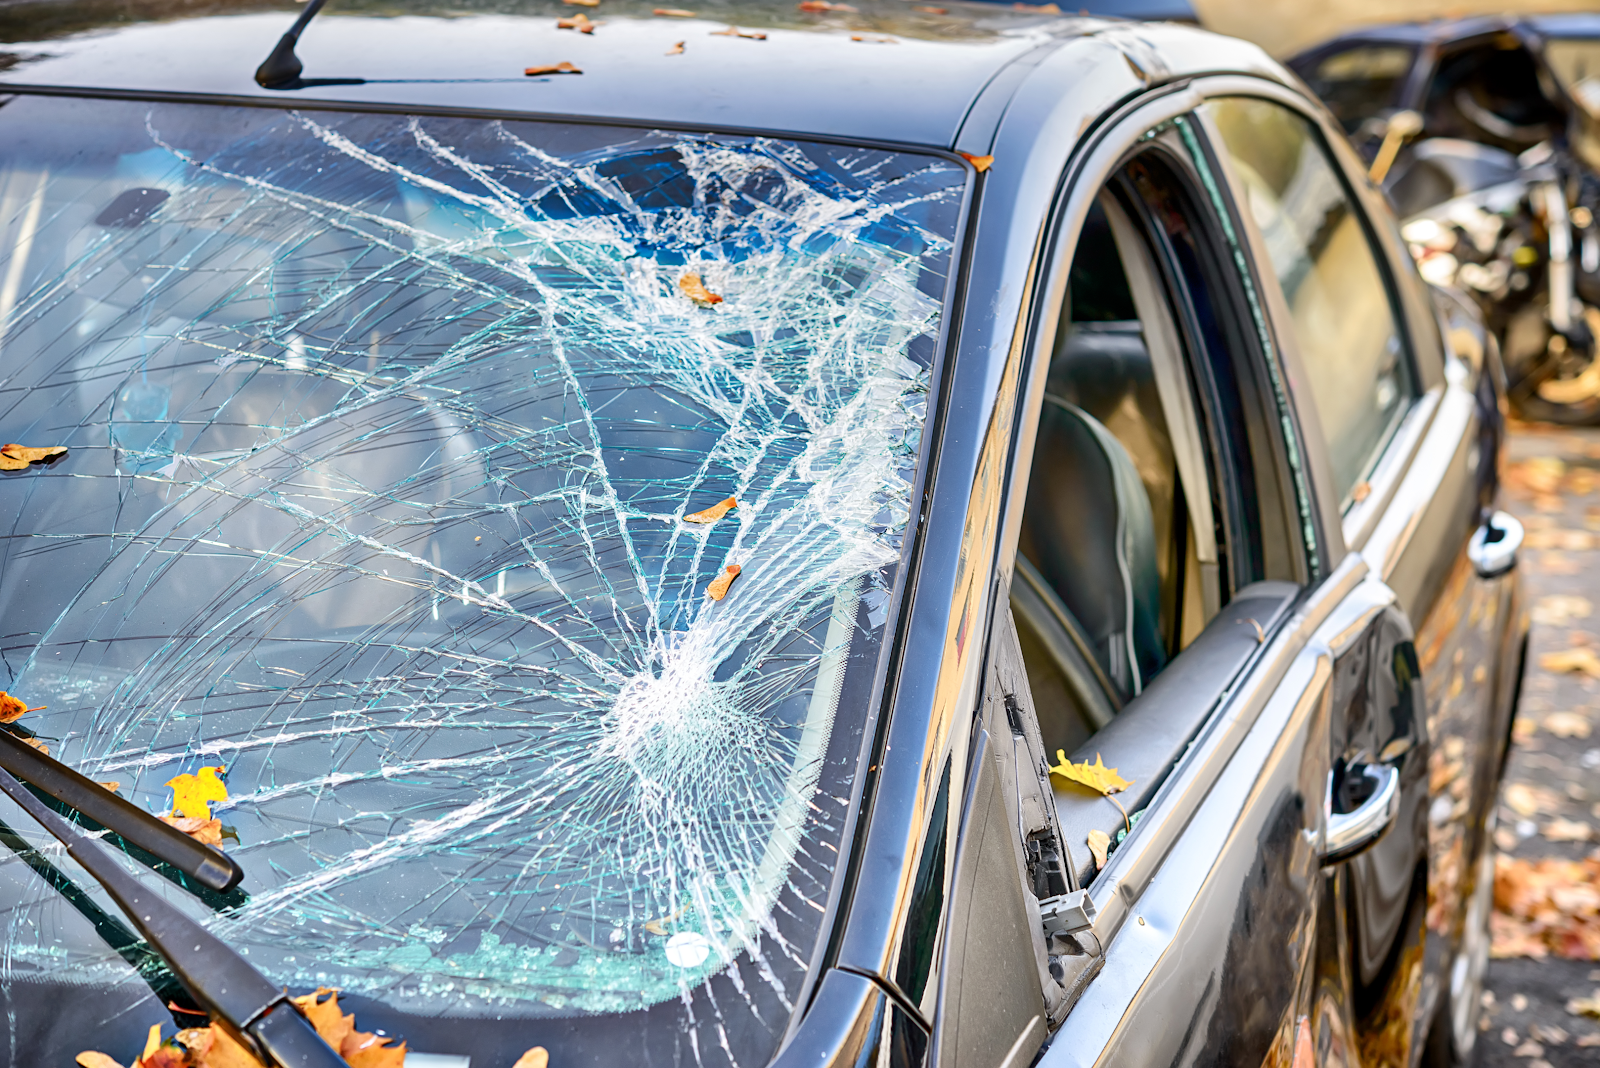 A close-up of a damaged vehicle with a heavily cracked windshield and dents in the driver side door.